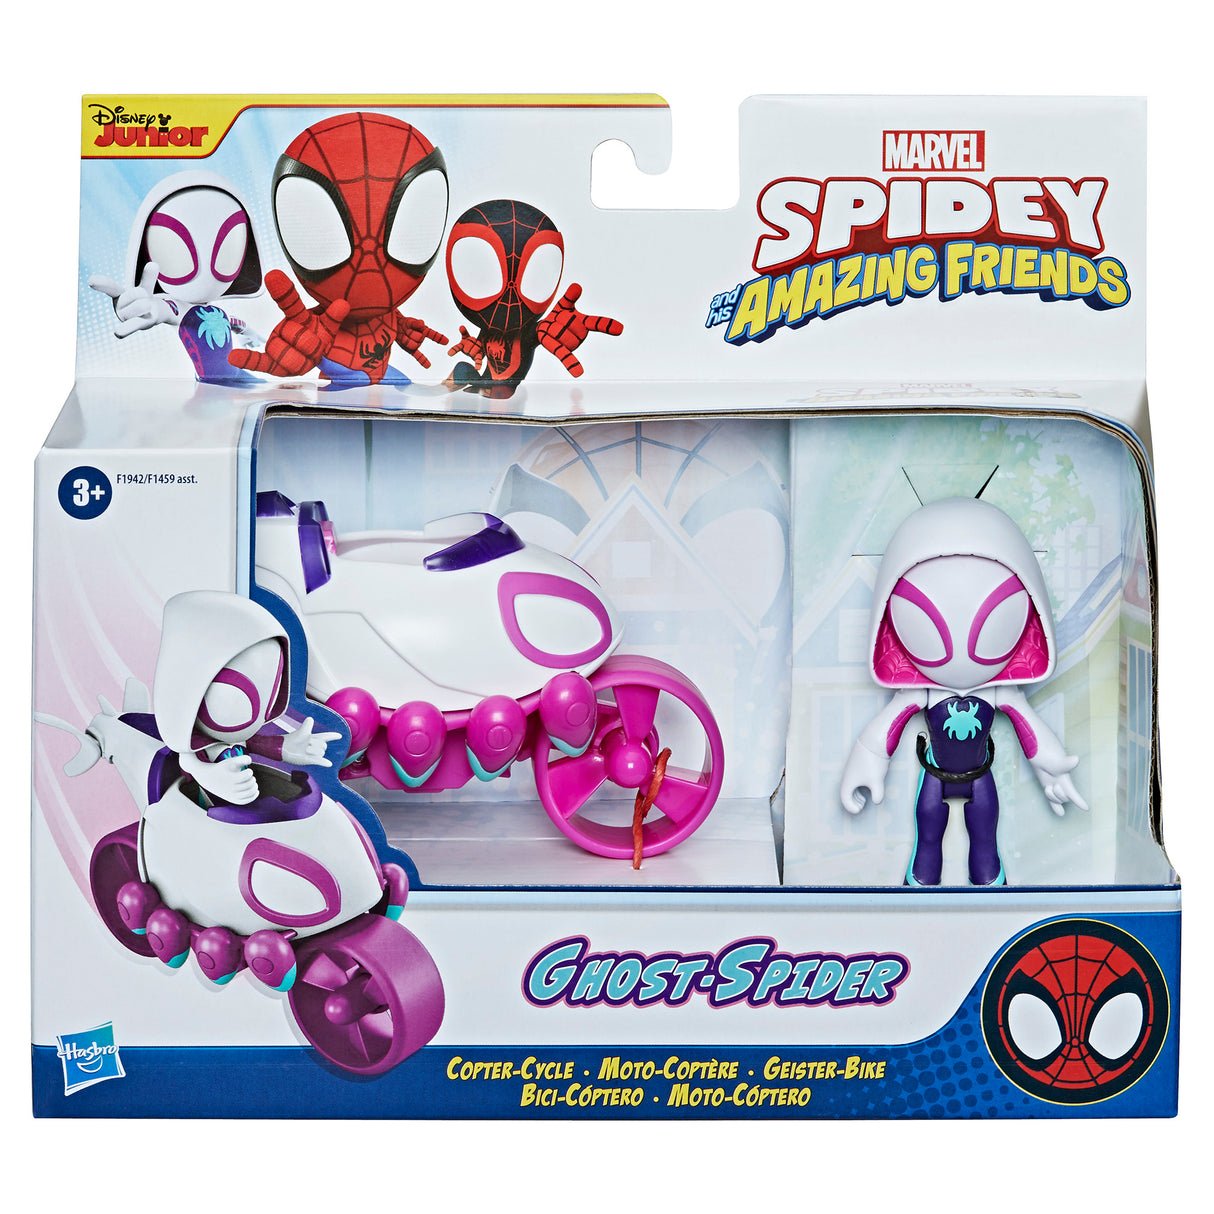 Spidey And His Amazing Friends - Ghost Spider Figure & Copter Cycle